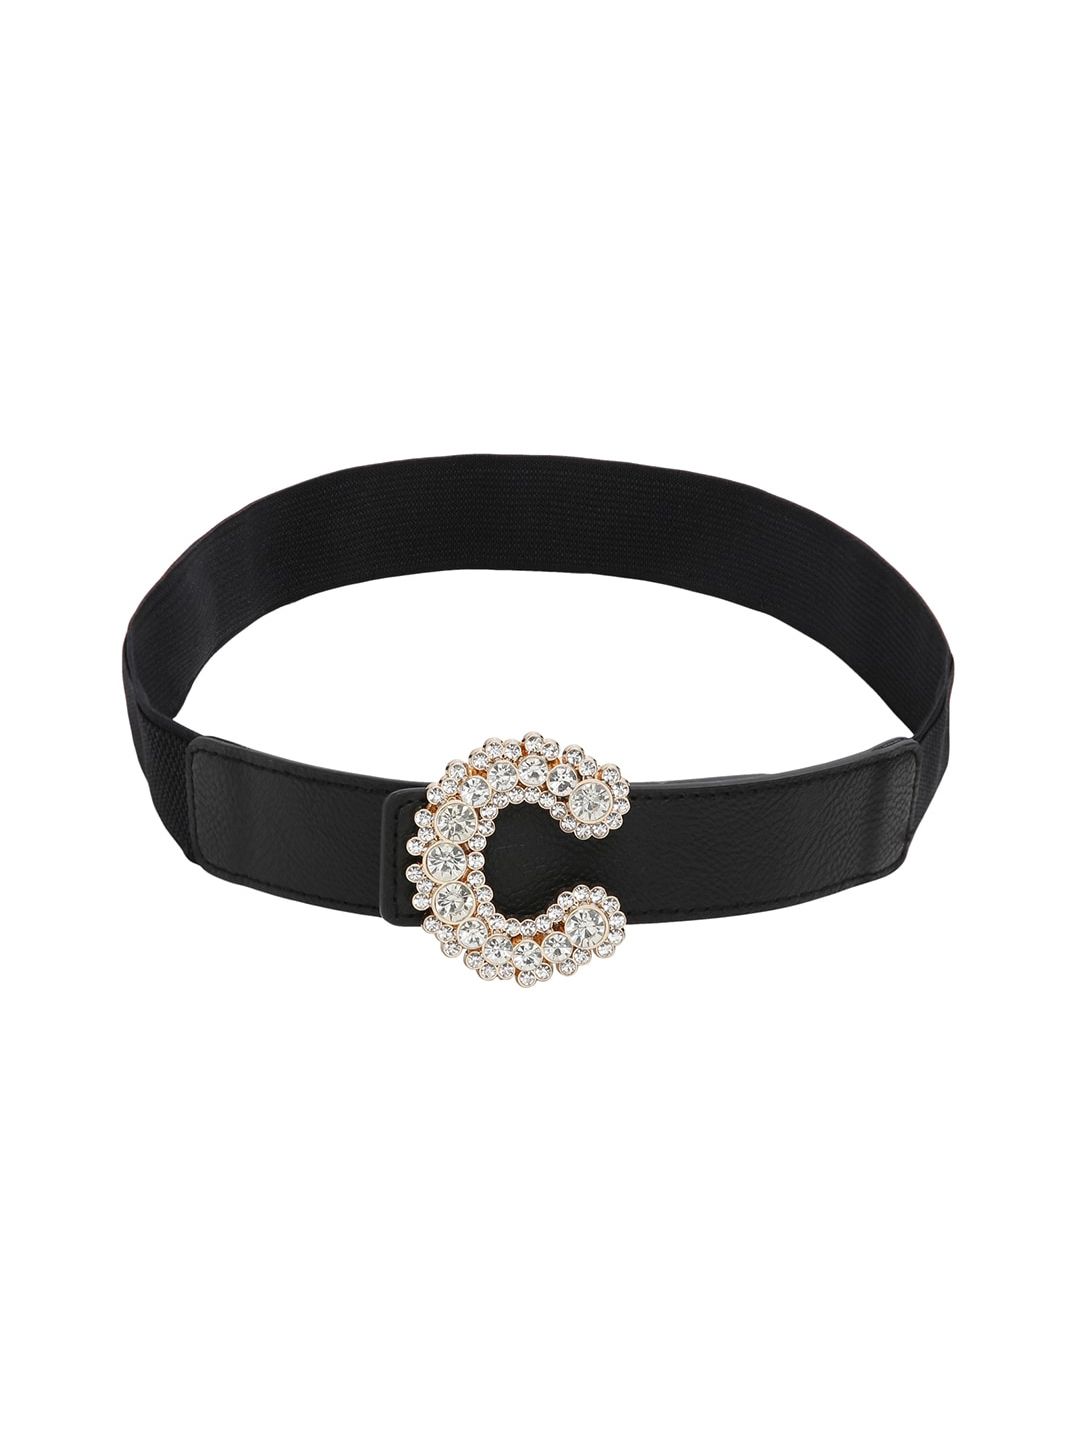 CRUSSET Women Black & Silver-Toned Textured Belt Price in India